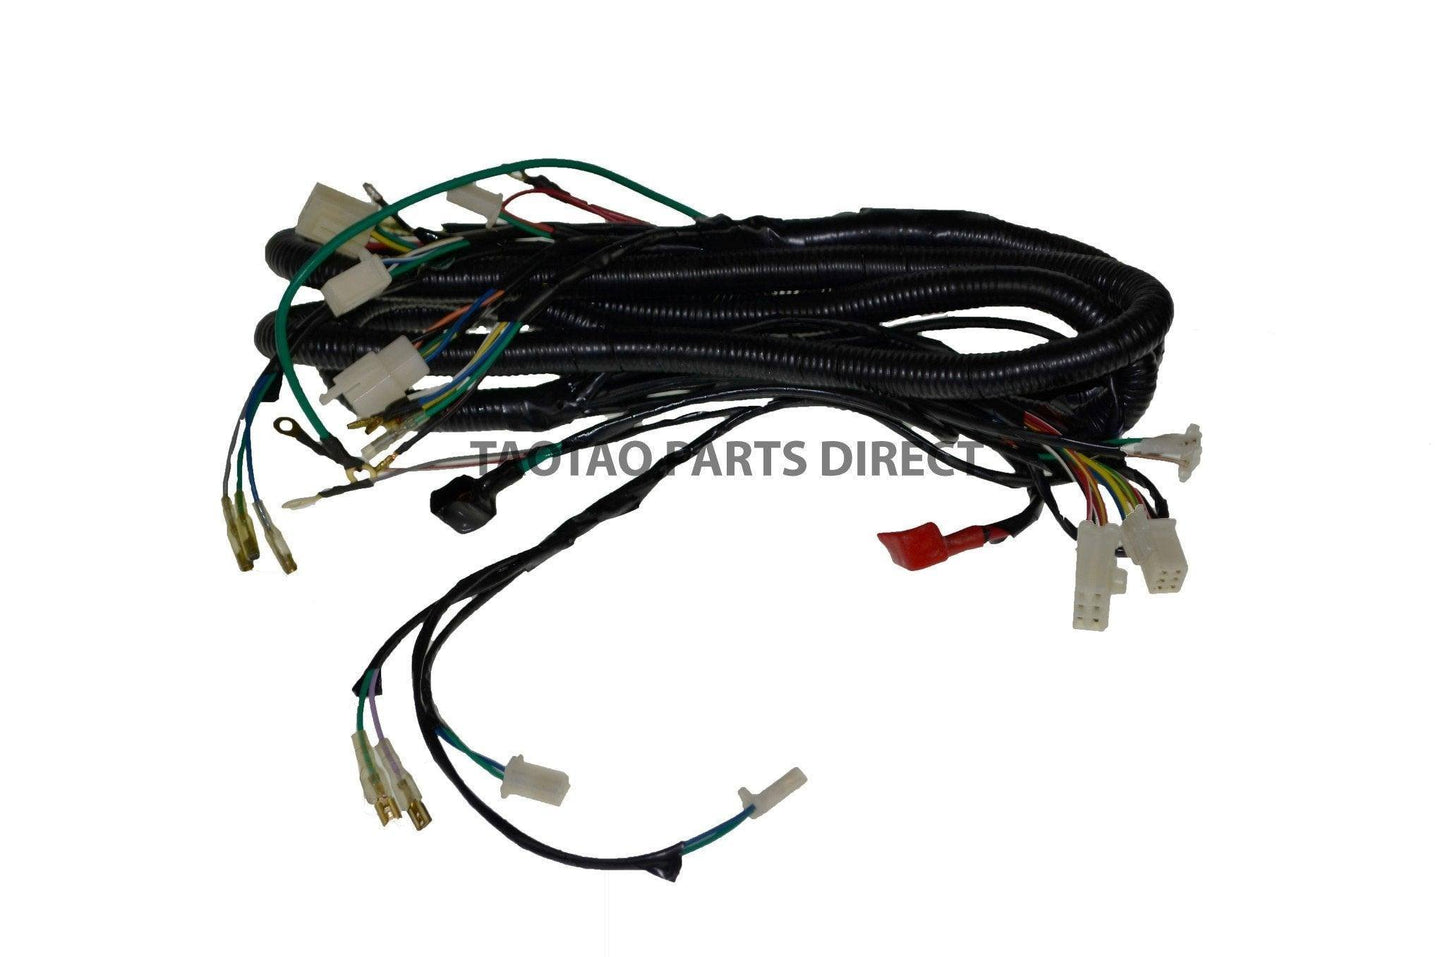 ATK125A Wire Harness #21 - TaoTao Parts Direct